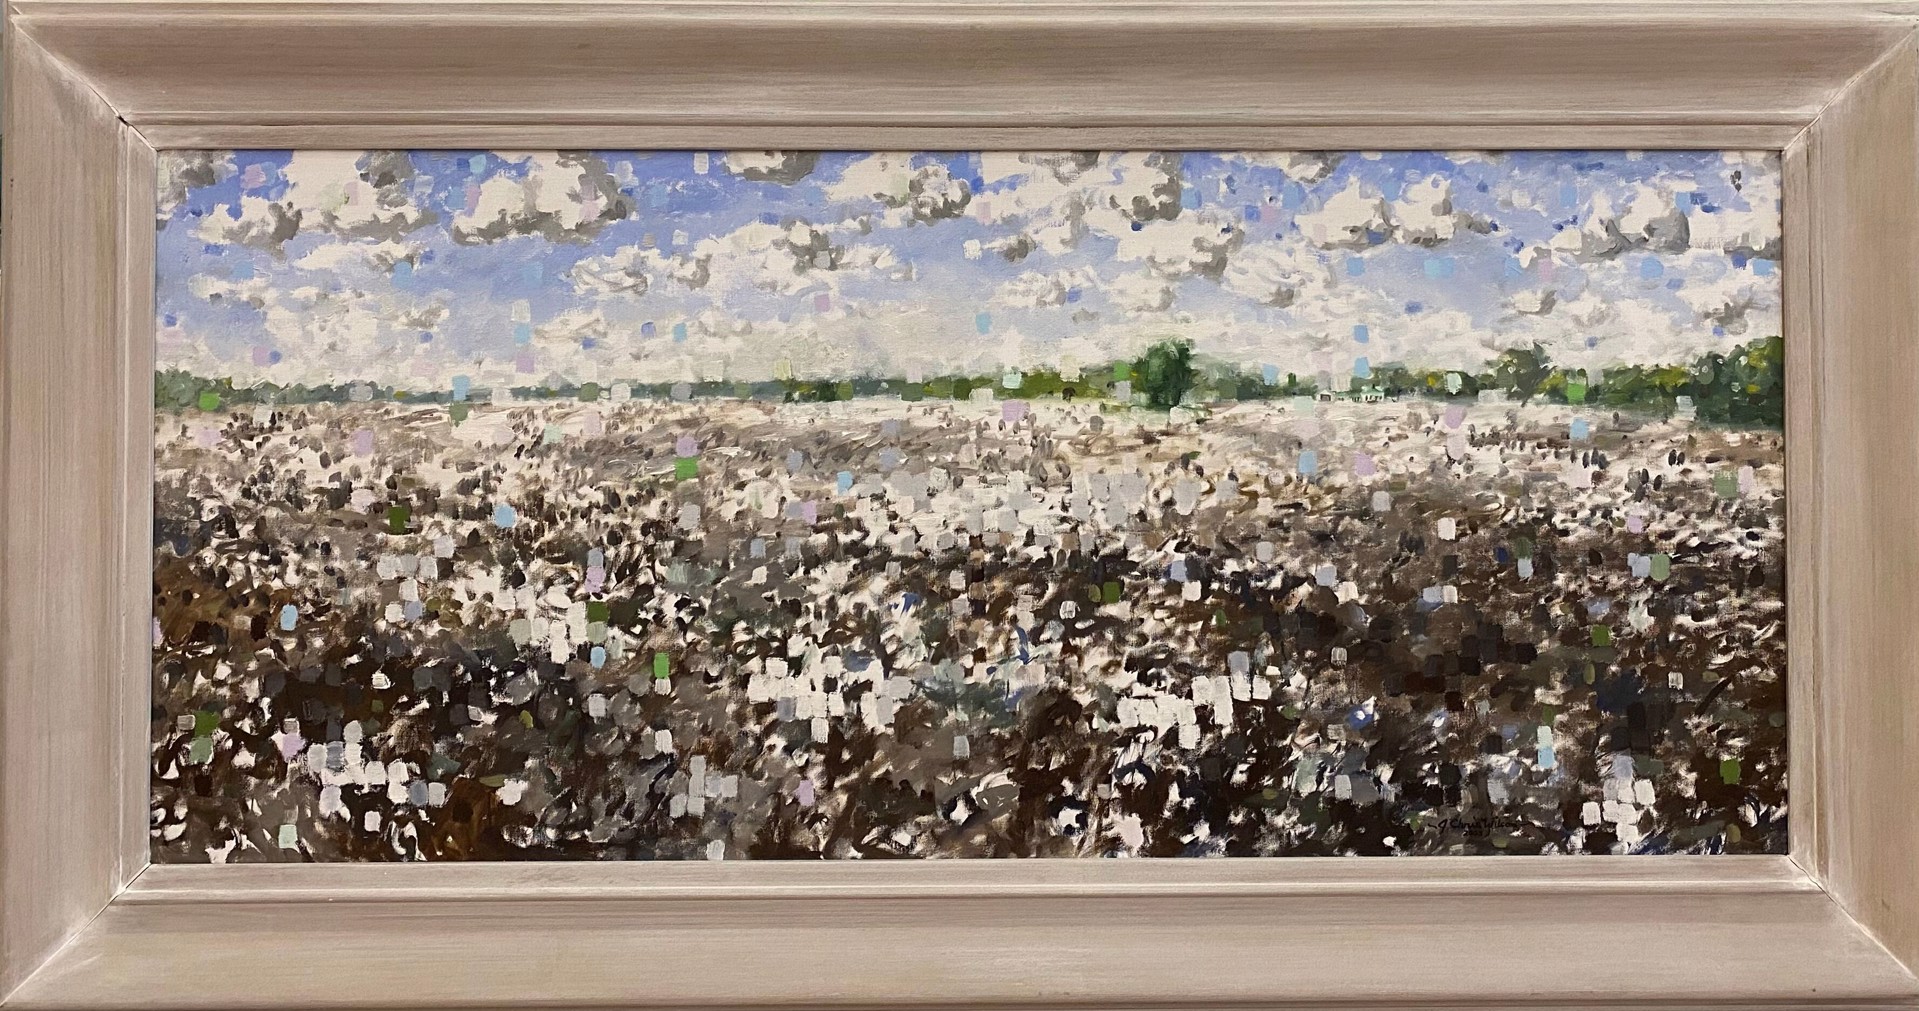 Edge Combe County Cotton Field by J. Chris Wilson